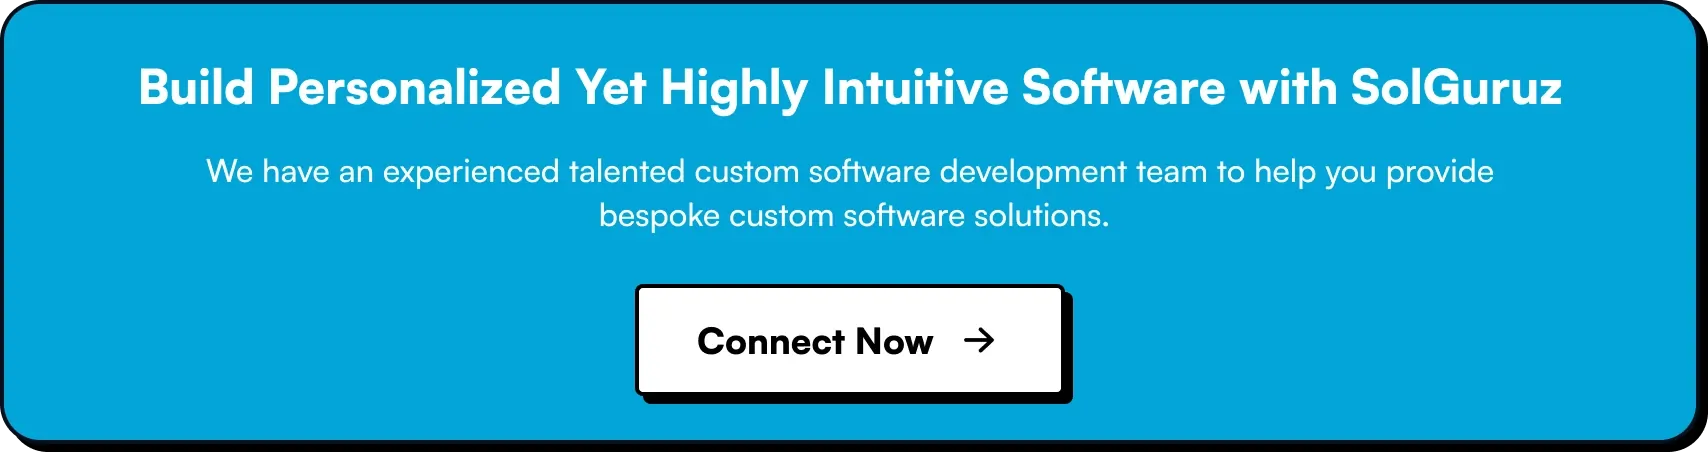 Build Personalized Yet Highly Intuitive Bespoke Software with SolGuruz. We have an experienced talented custom software development team to help you provide bespoke custom software solutions. Connect Now!